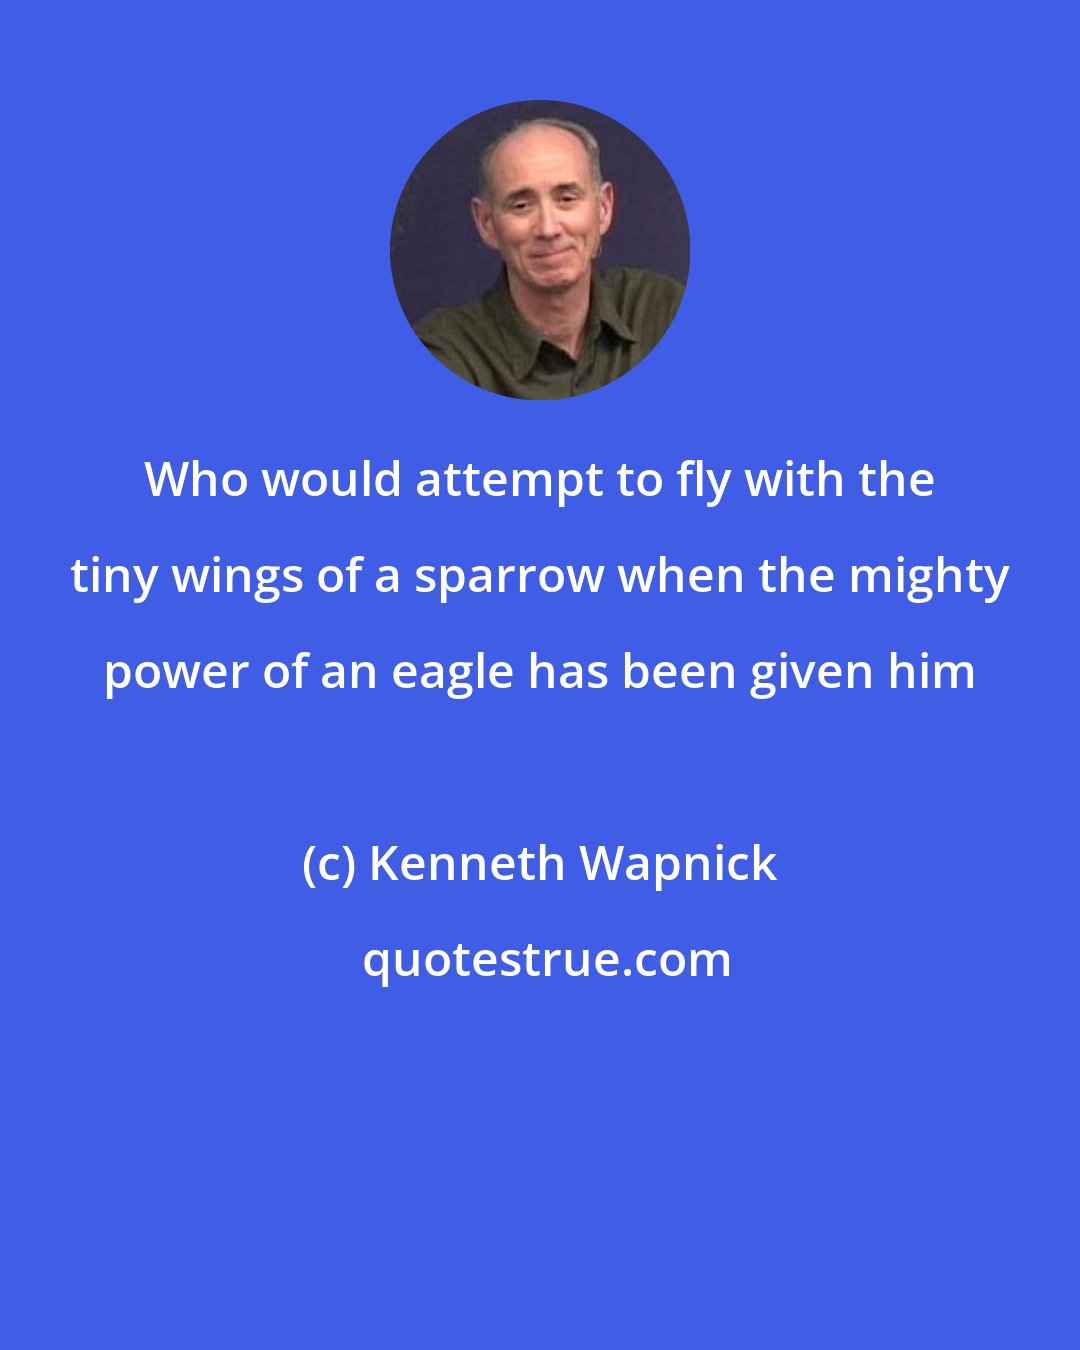 Kenneth Wapnick: Who would attempt to fly with the tiny wings of a sparrow when the mighty power of an eagle has been given him